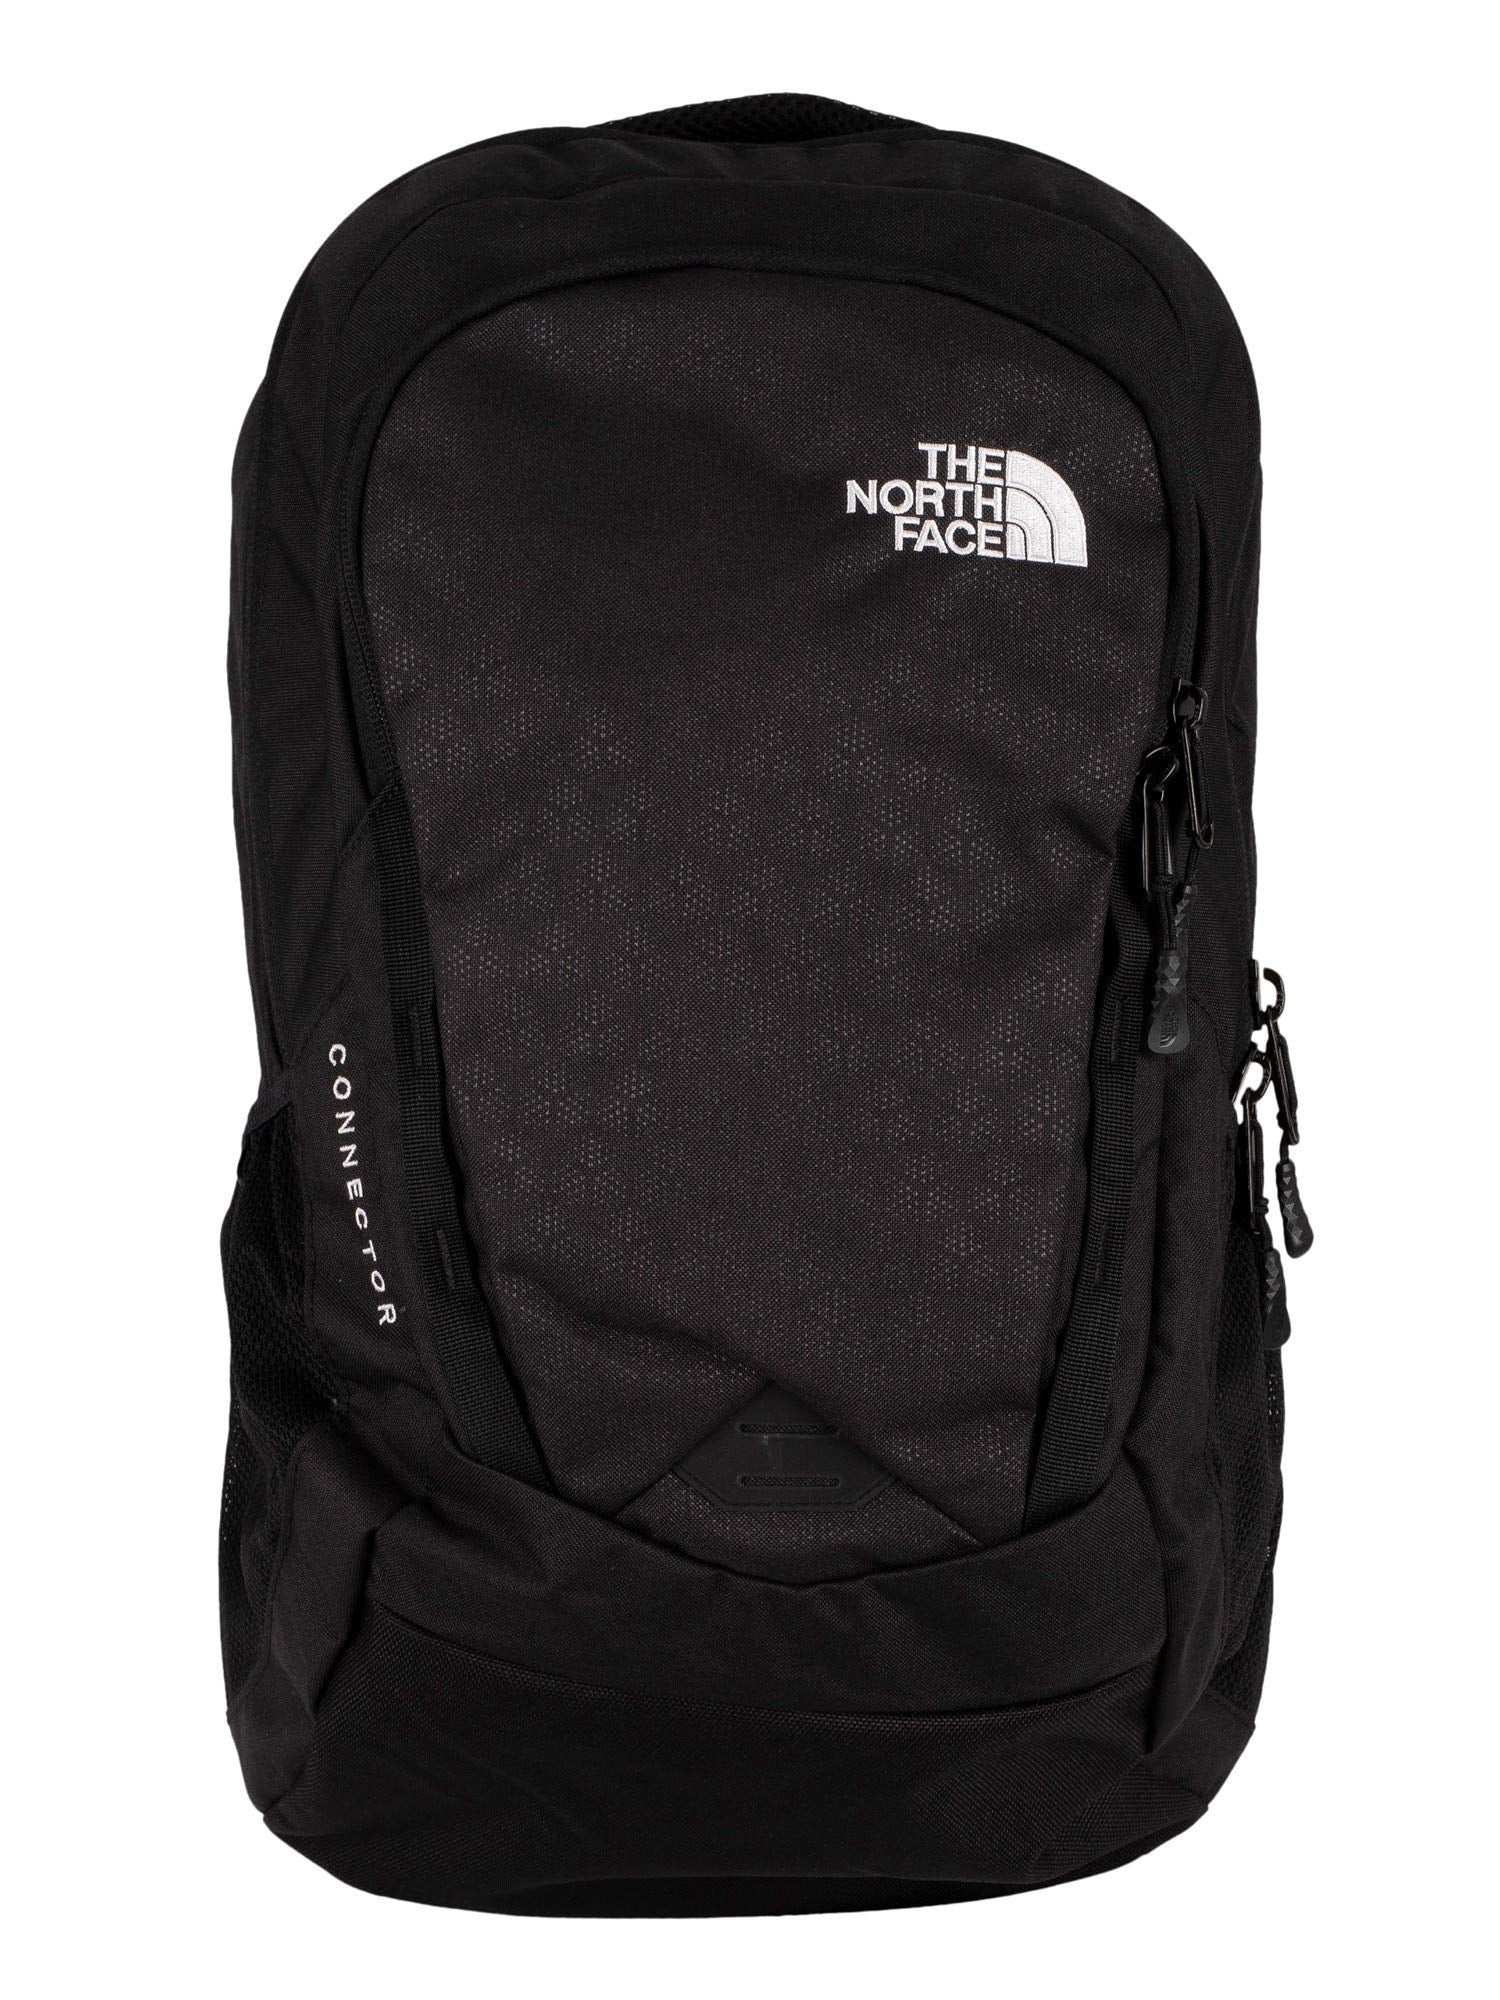 The North Face - Connector Unisex Backpack, One Size